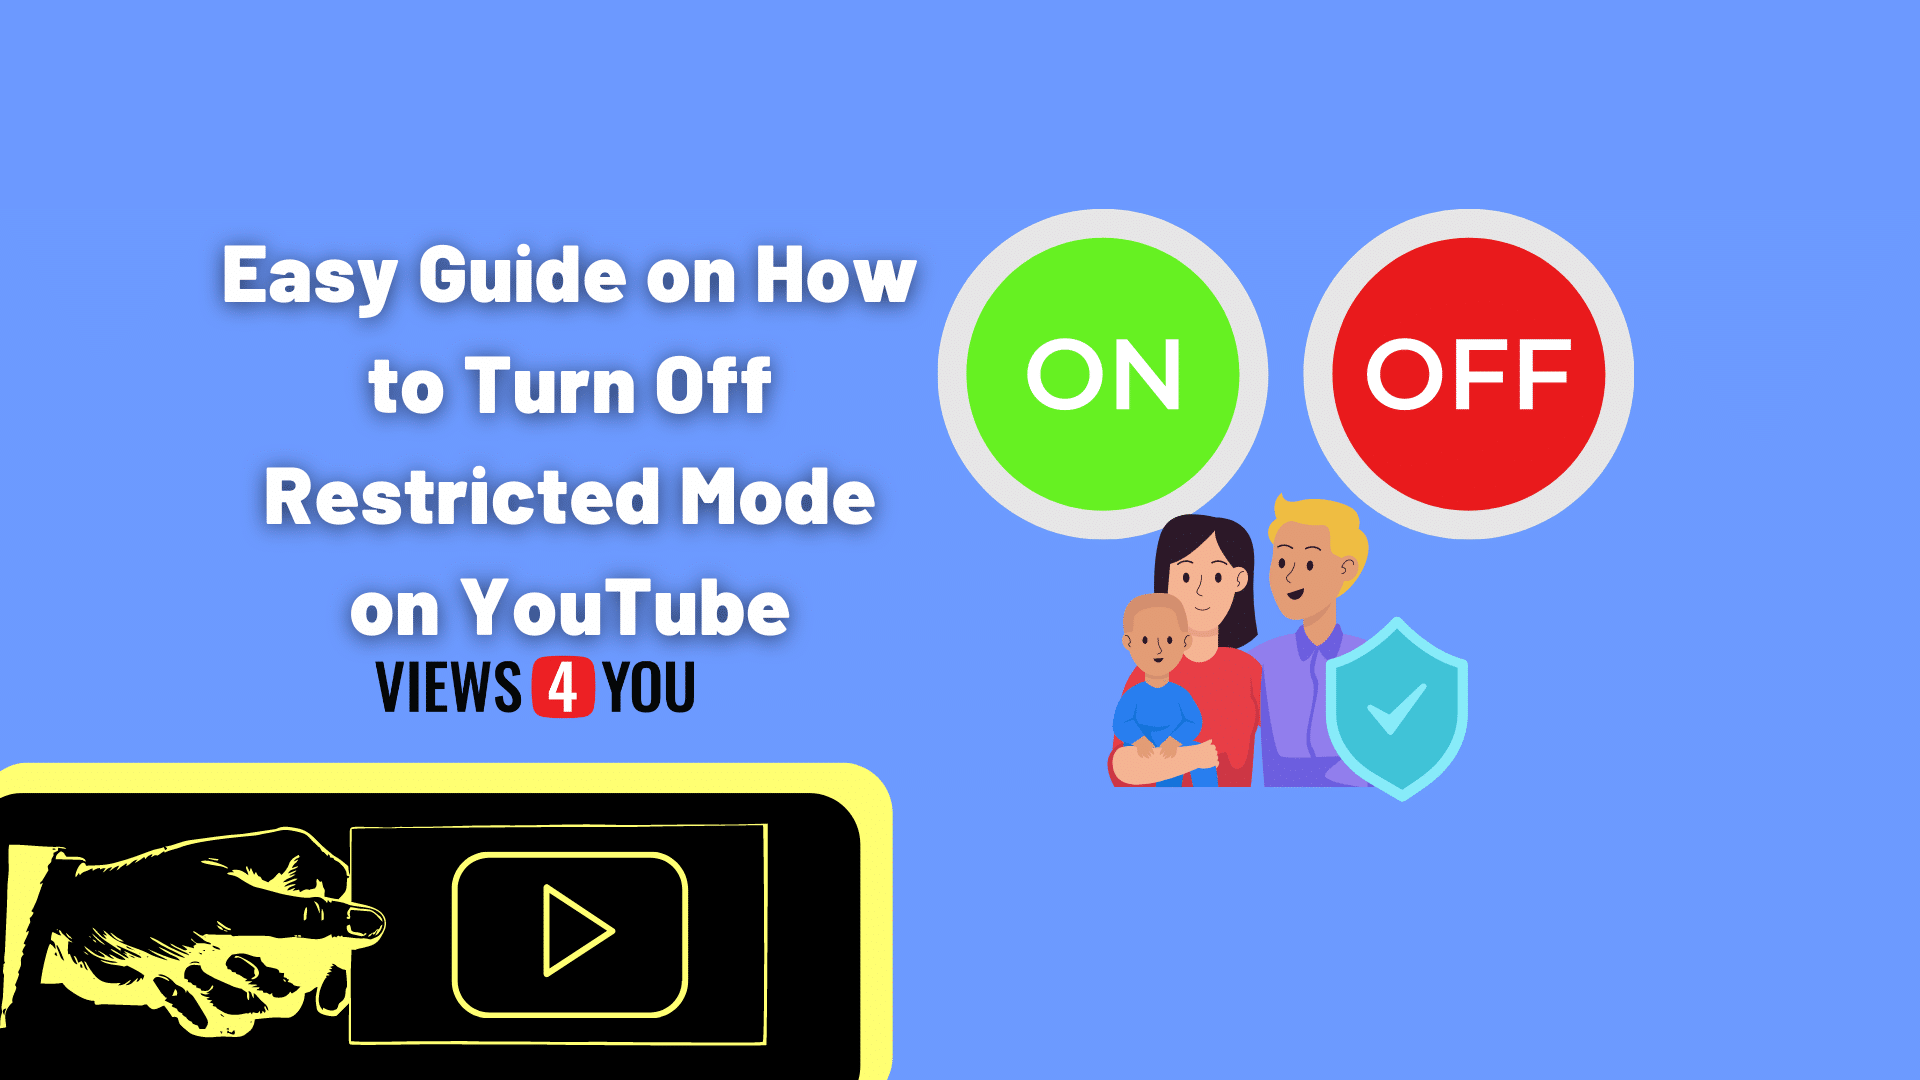 Easy Guide on How to Turn Off Restricted Mode on YouTube